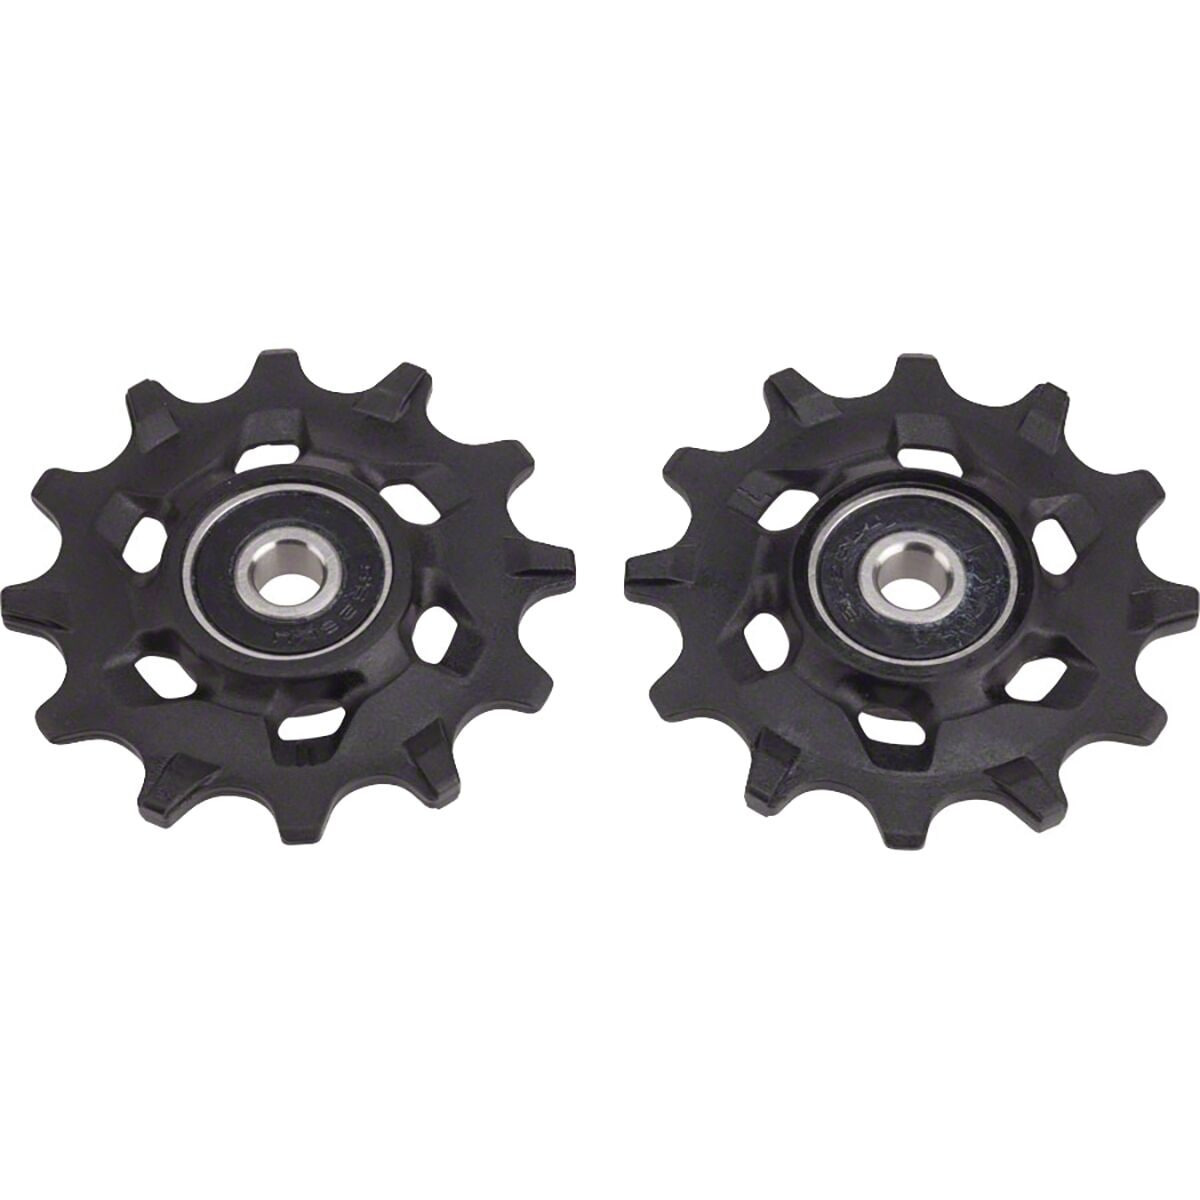 SRAM X-Sync Pulley Wheel Assembly Kit